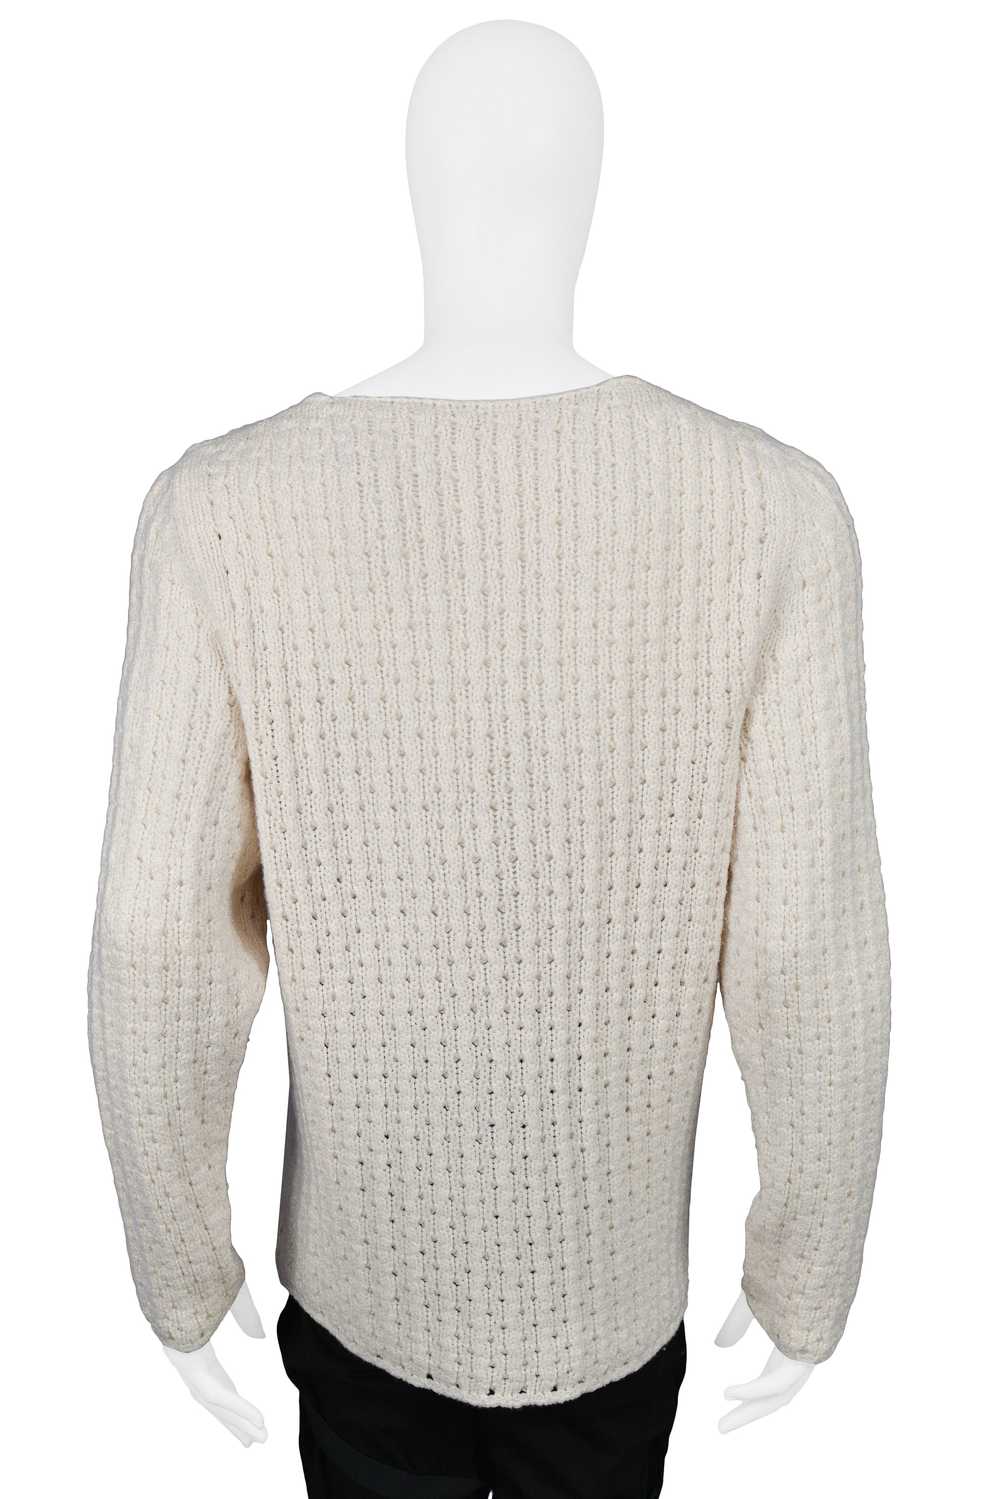 HELMUT LANG OFF WHITE KNIT SWEATER - image 2